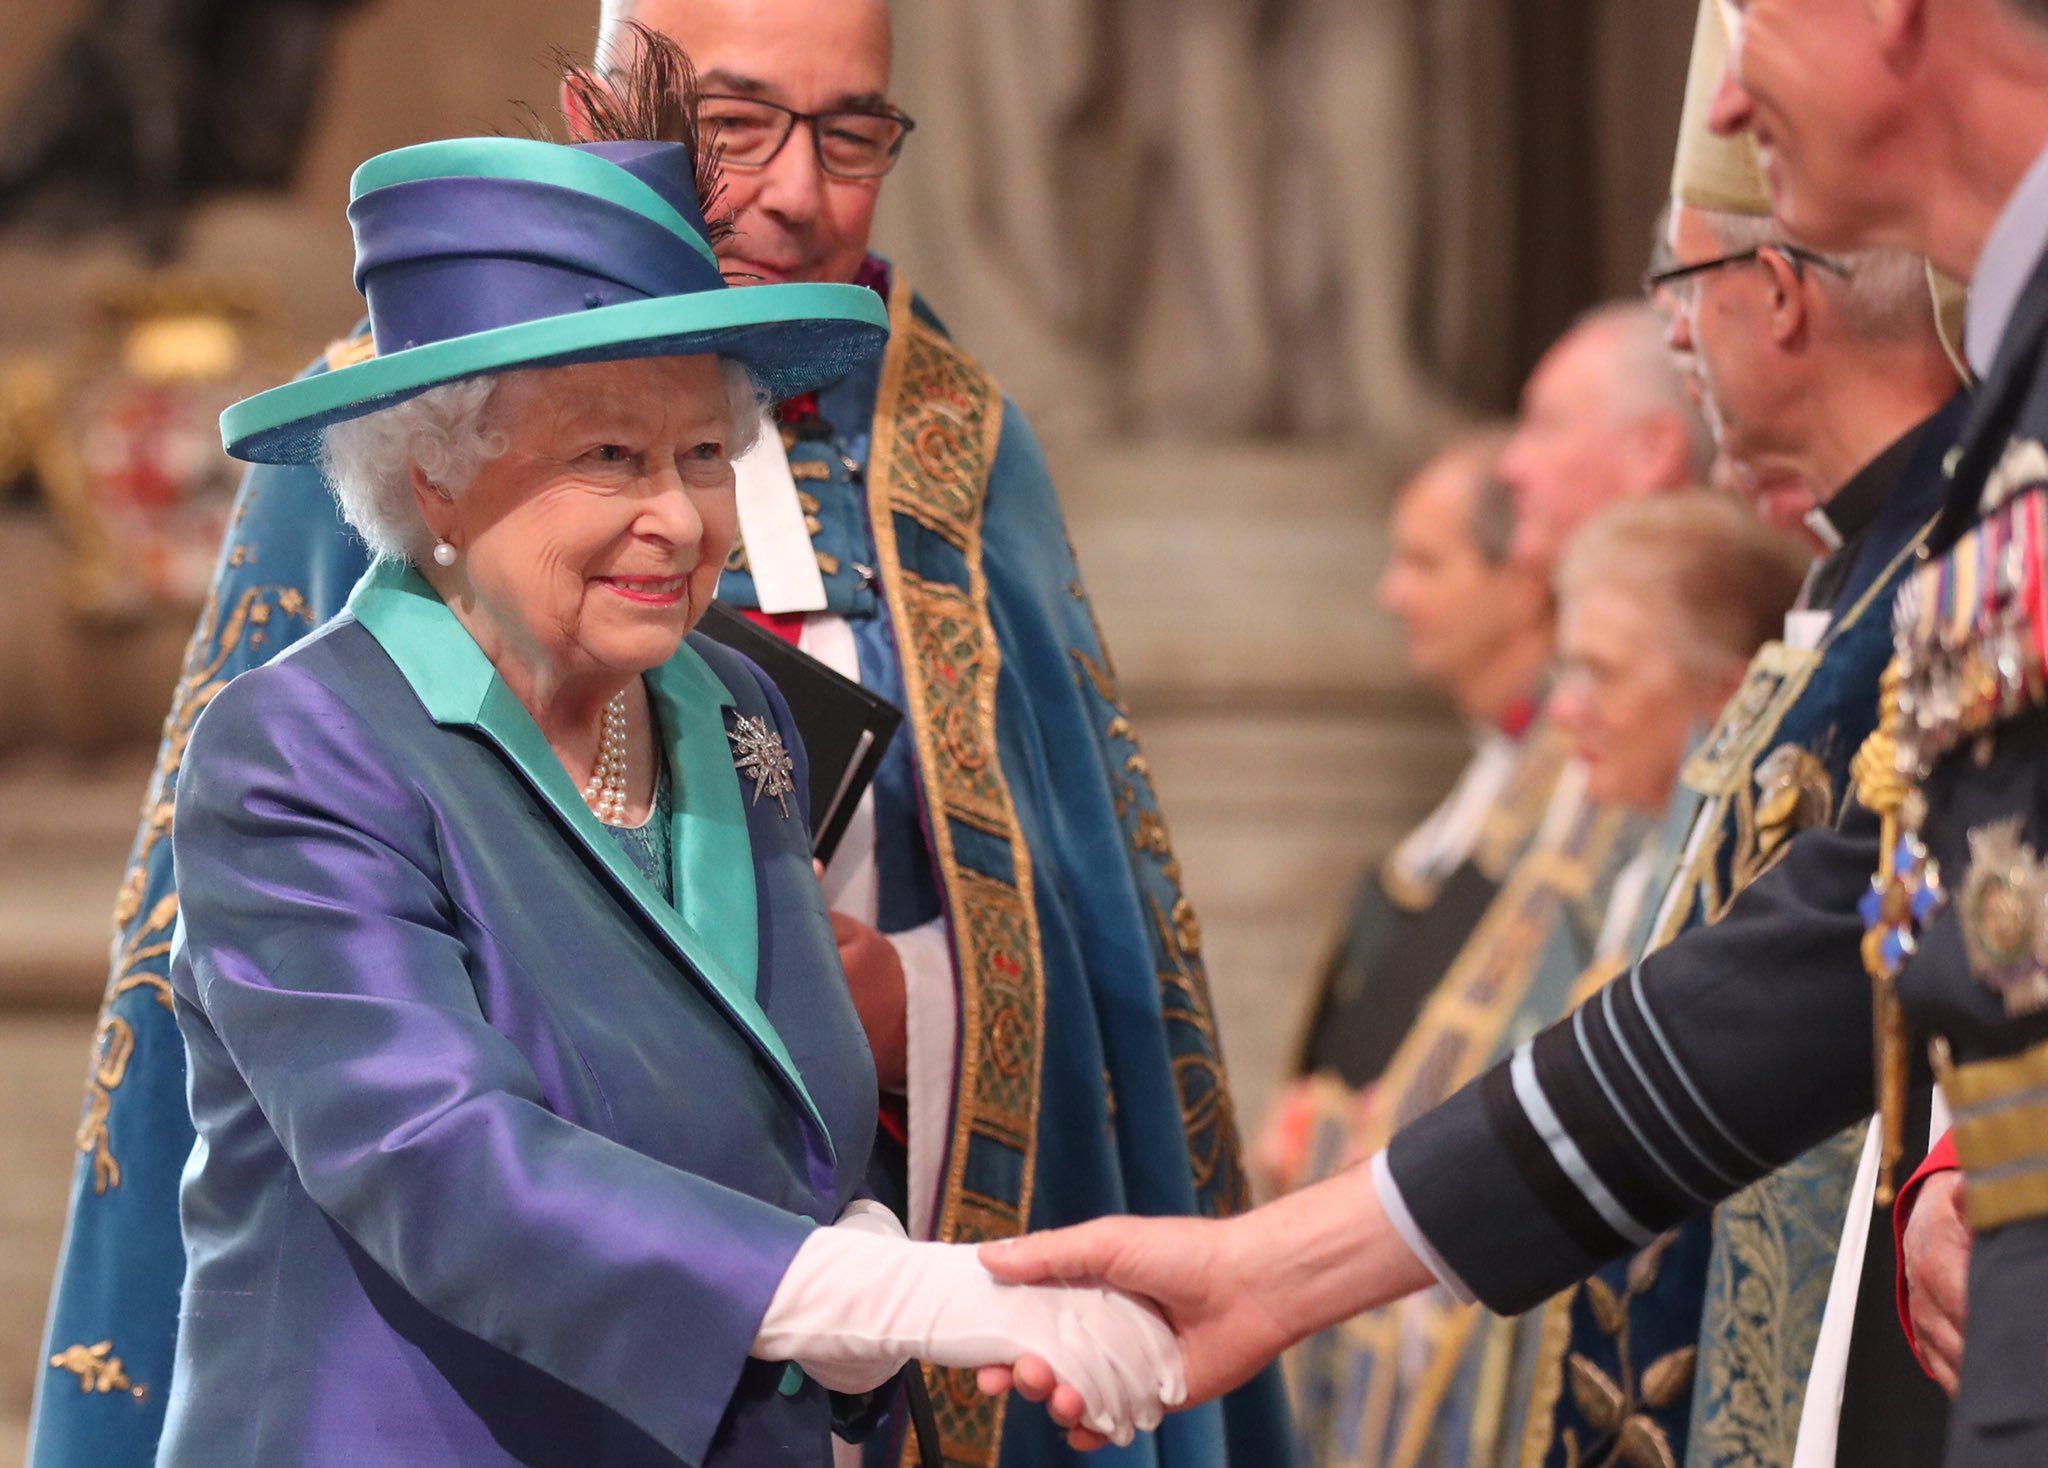 Hit by ‘racist royal’ row, Team Queen Elizabeth aims at diversity in staff